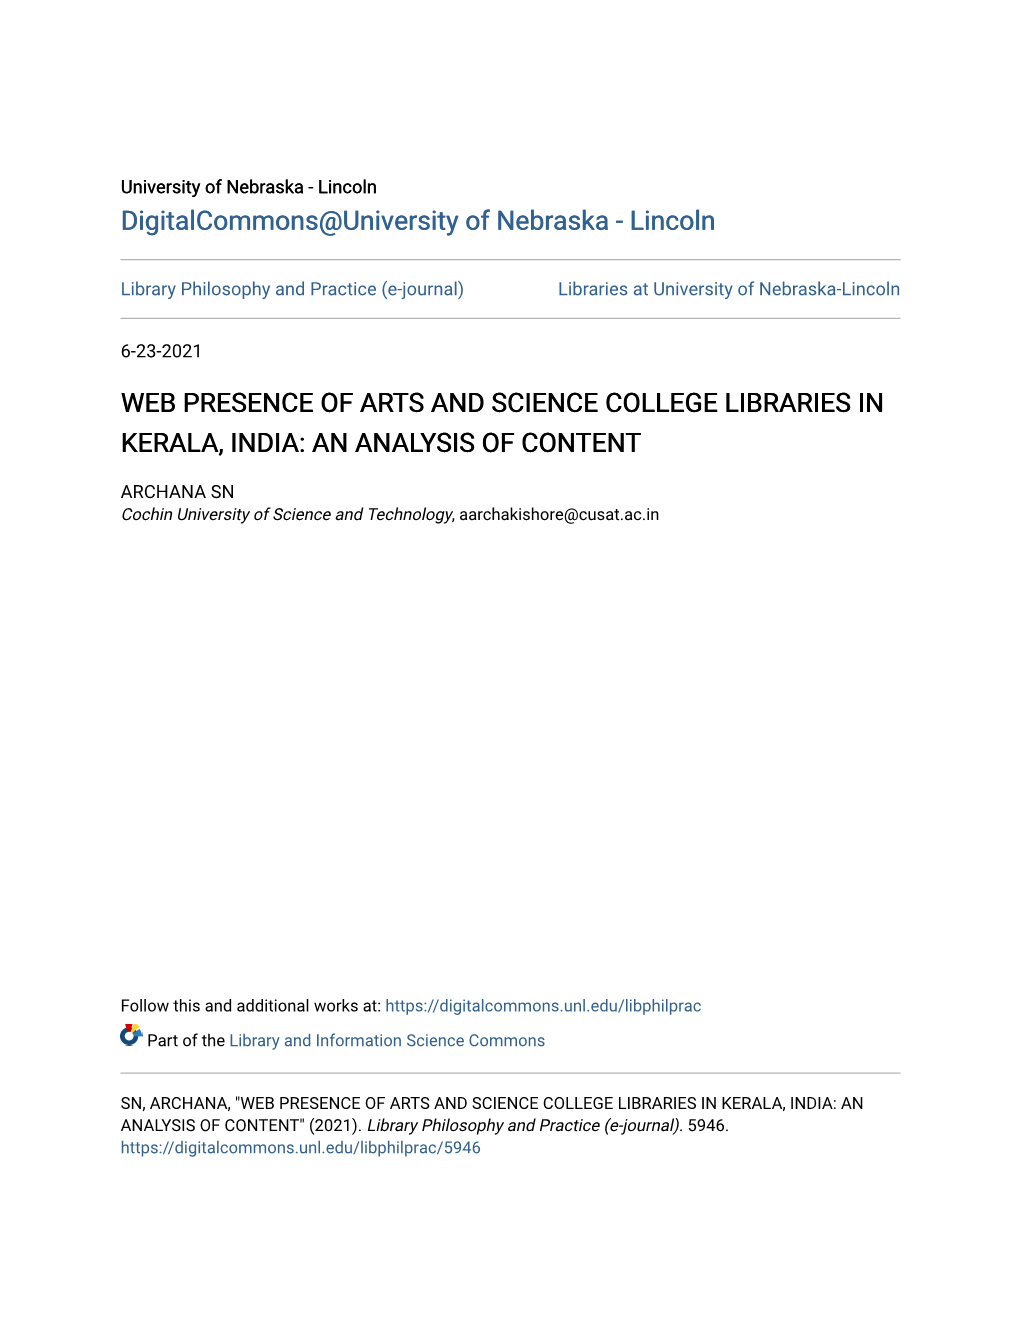 Web Presence of Arts and Science College Libraries in Kerala, India: an Analysis of Content